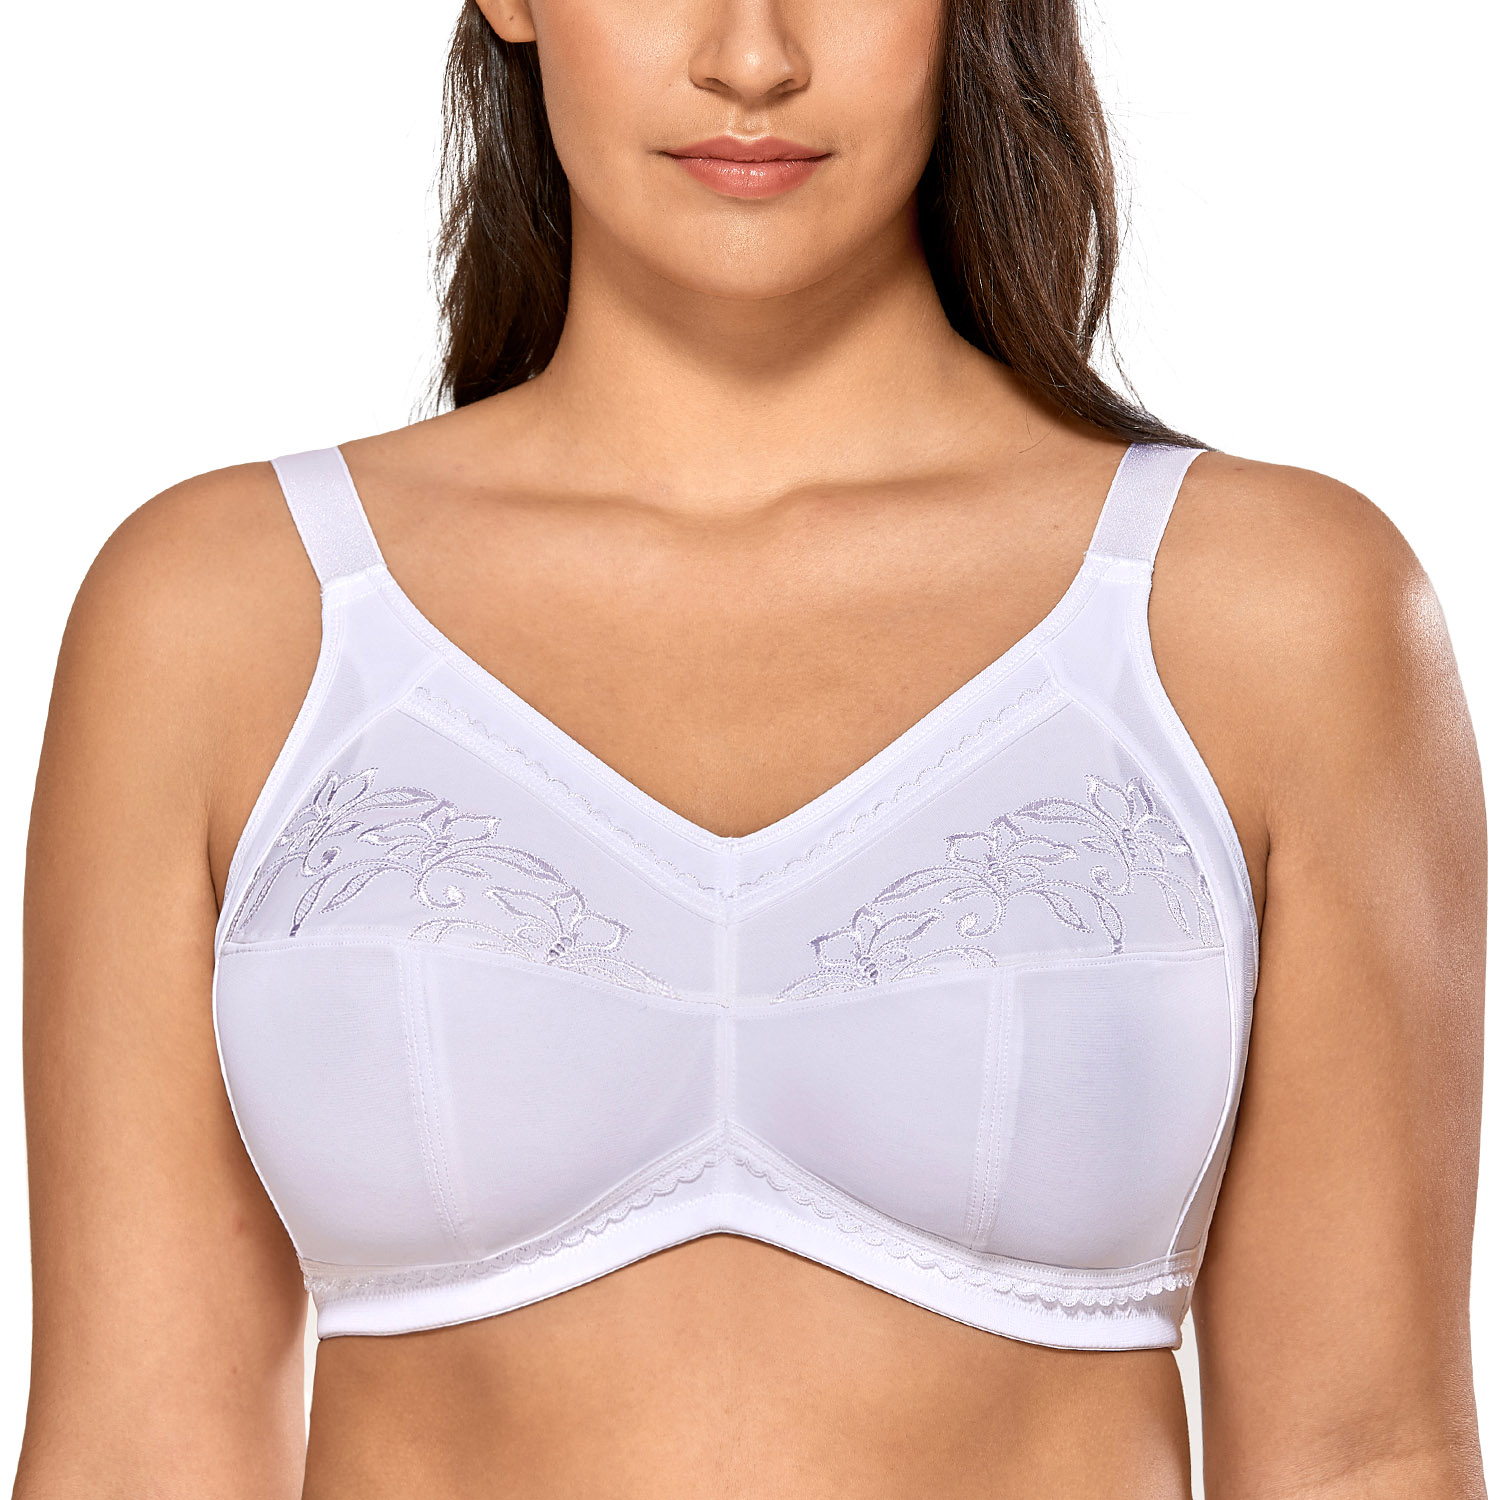 Delimira Womens Full Coverage Wire Free Back Support Mastectomy